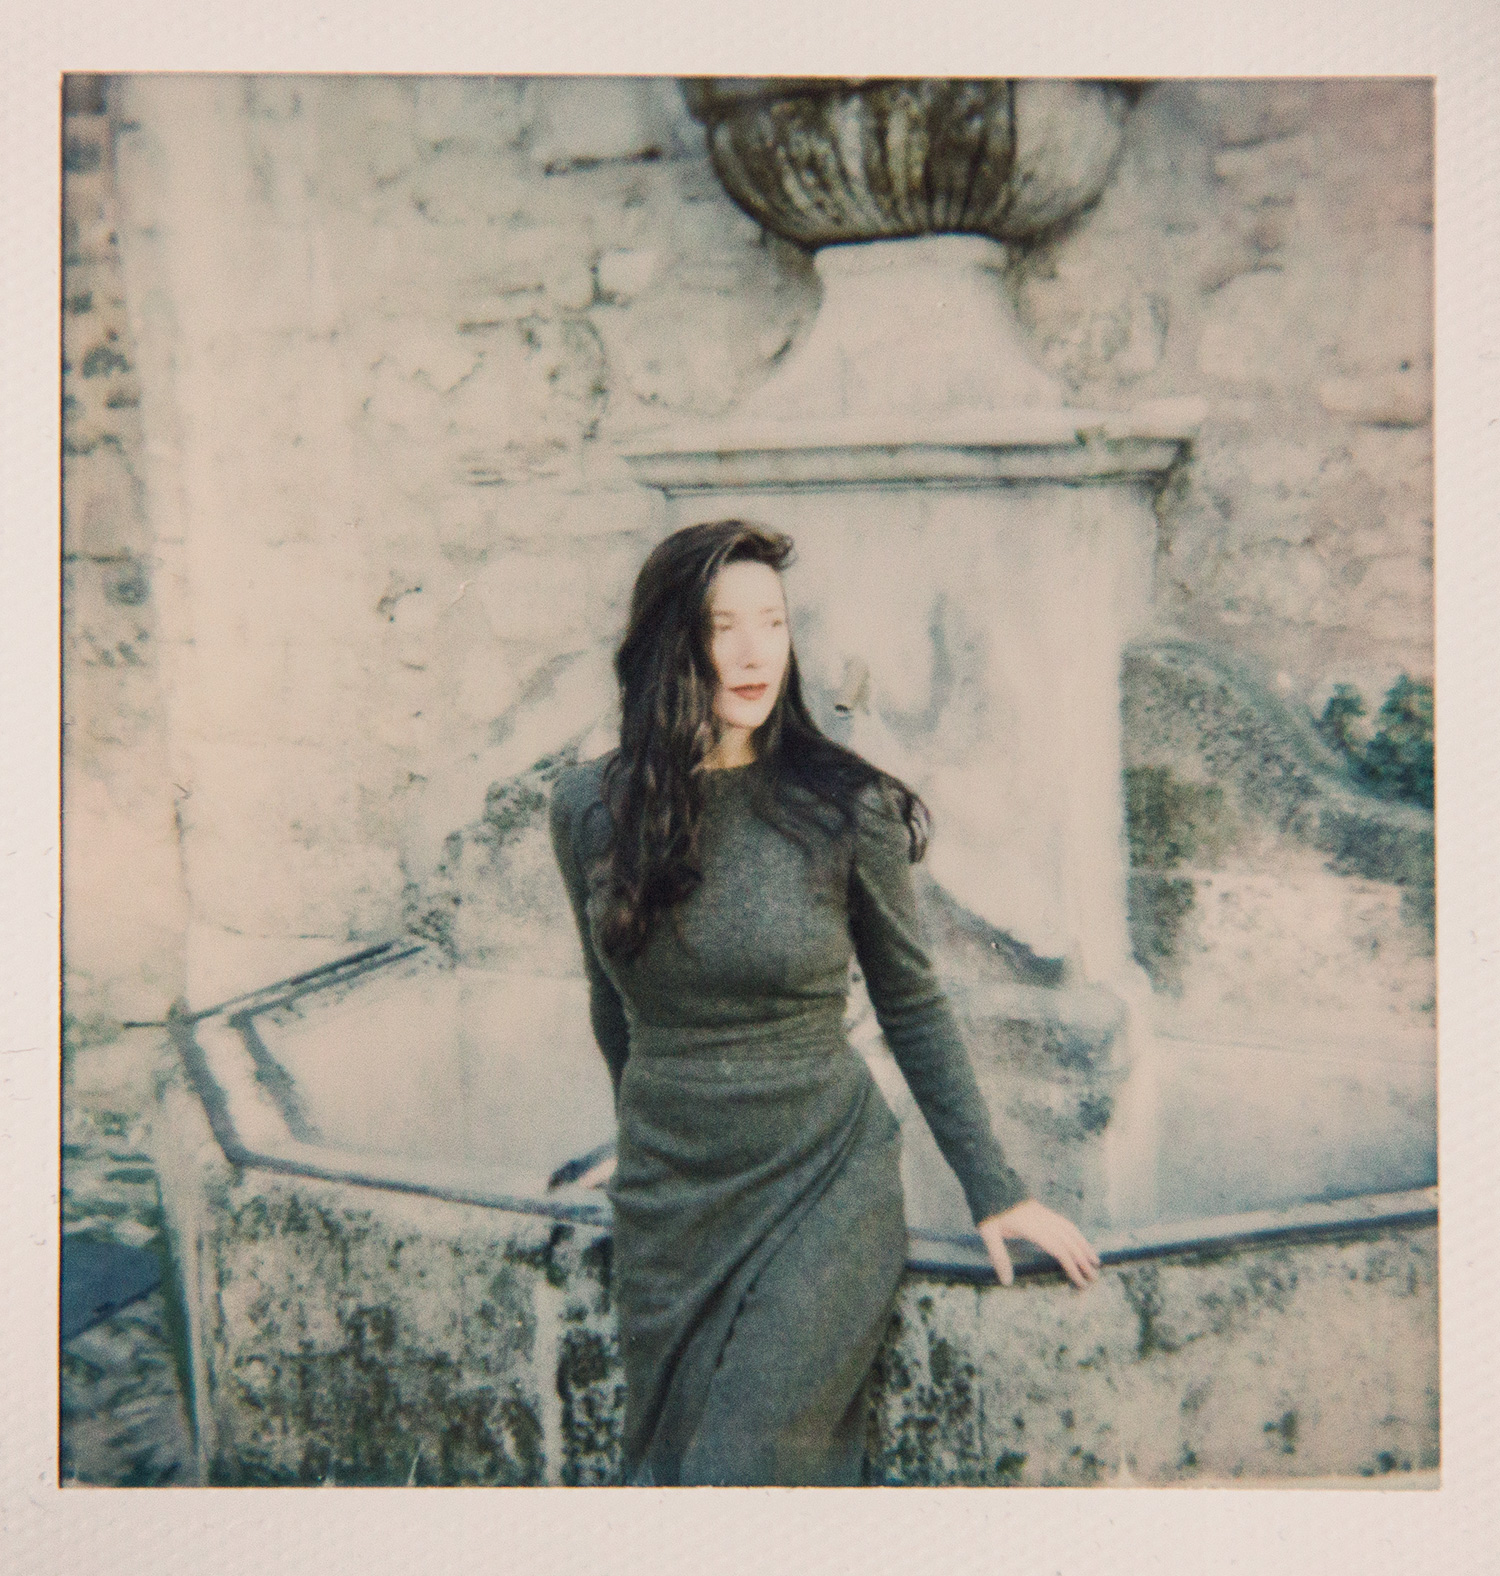 Testing the new I-1 analog camera by Impossible Projects